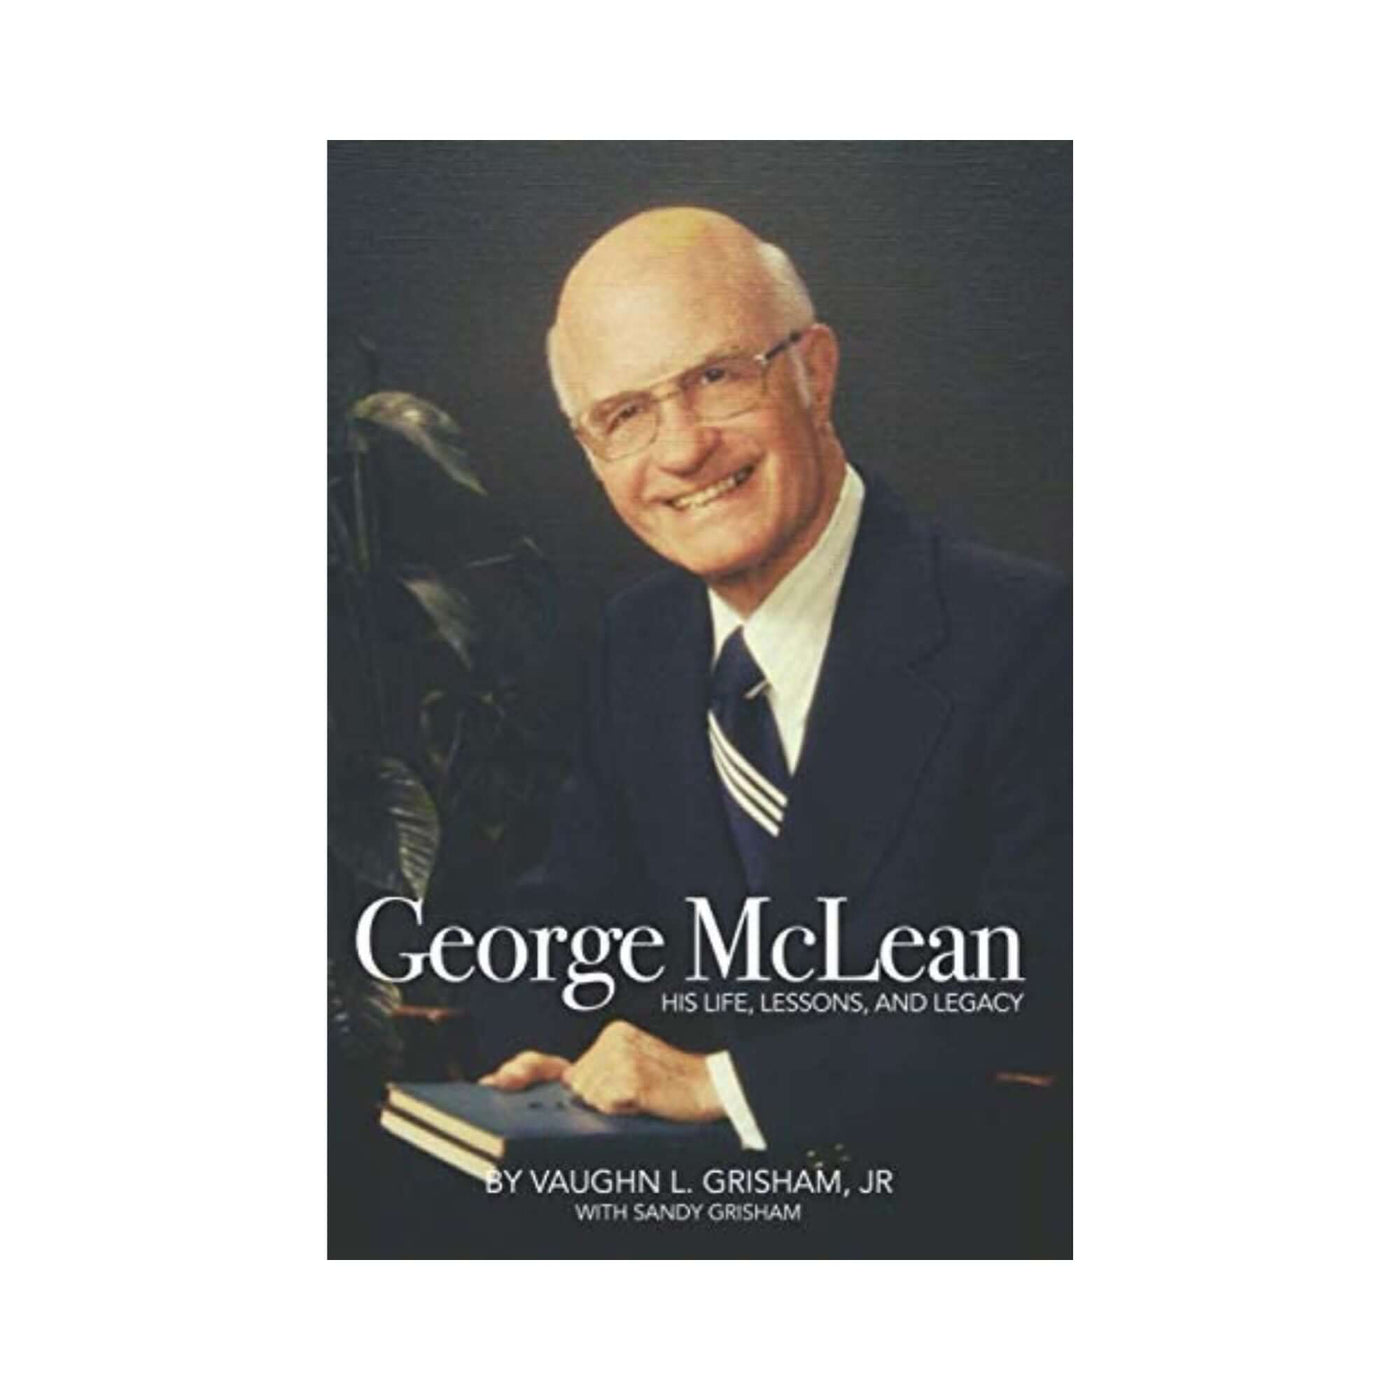 George McLean: His Life, Lessons, and Legacy (Signed Copy)